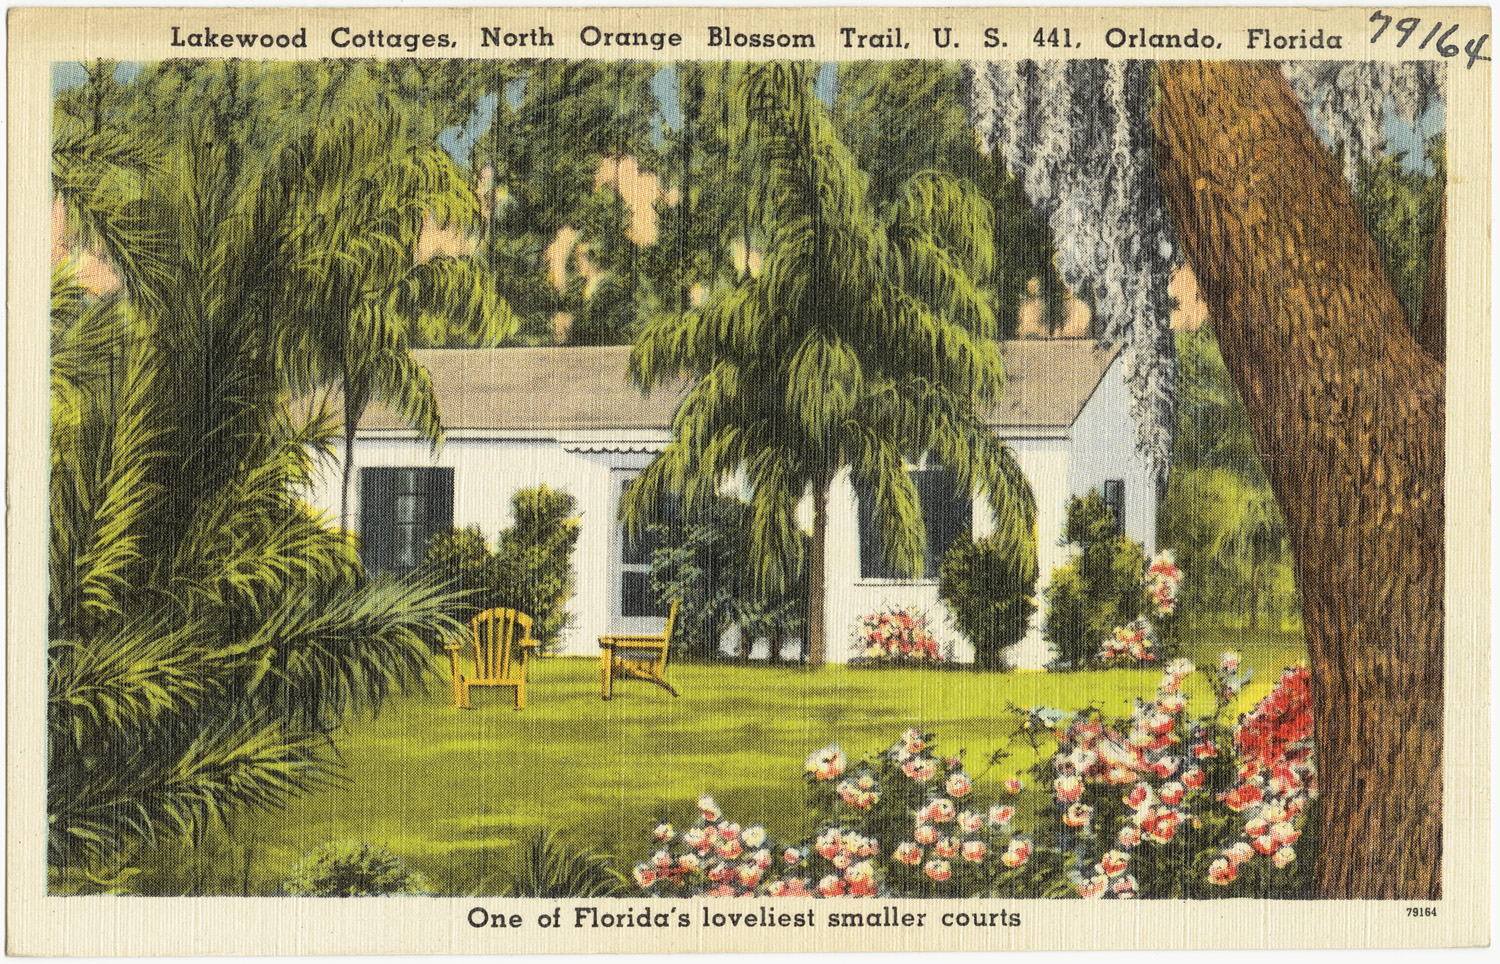 this is an old vintage postcard that shows a home with trees in the yard